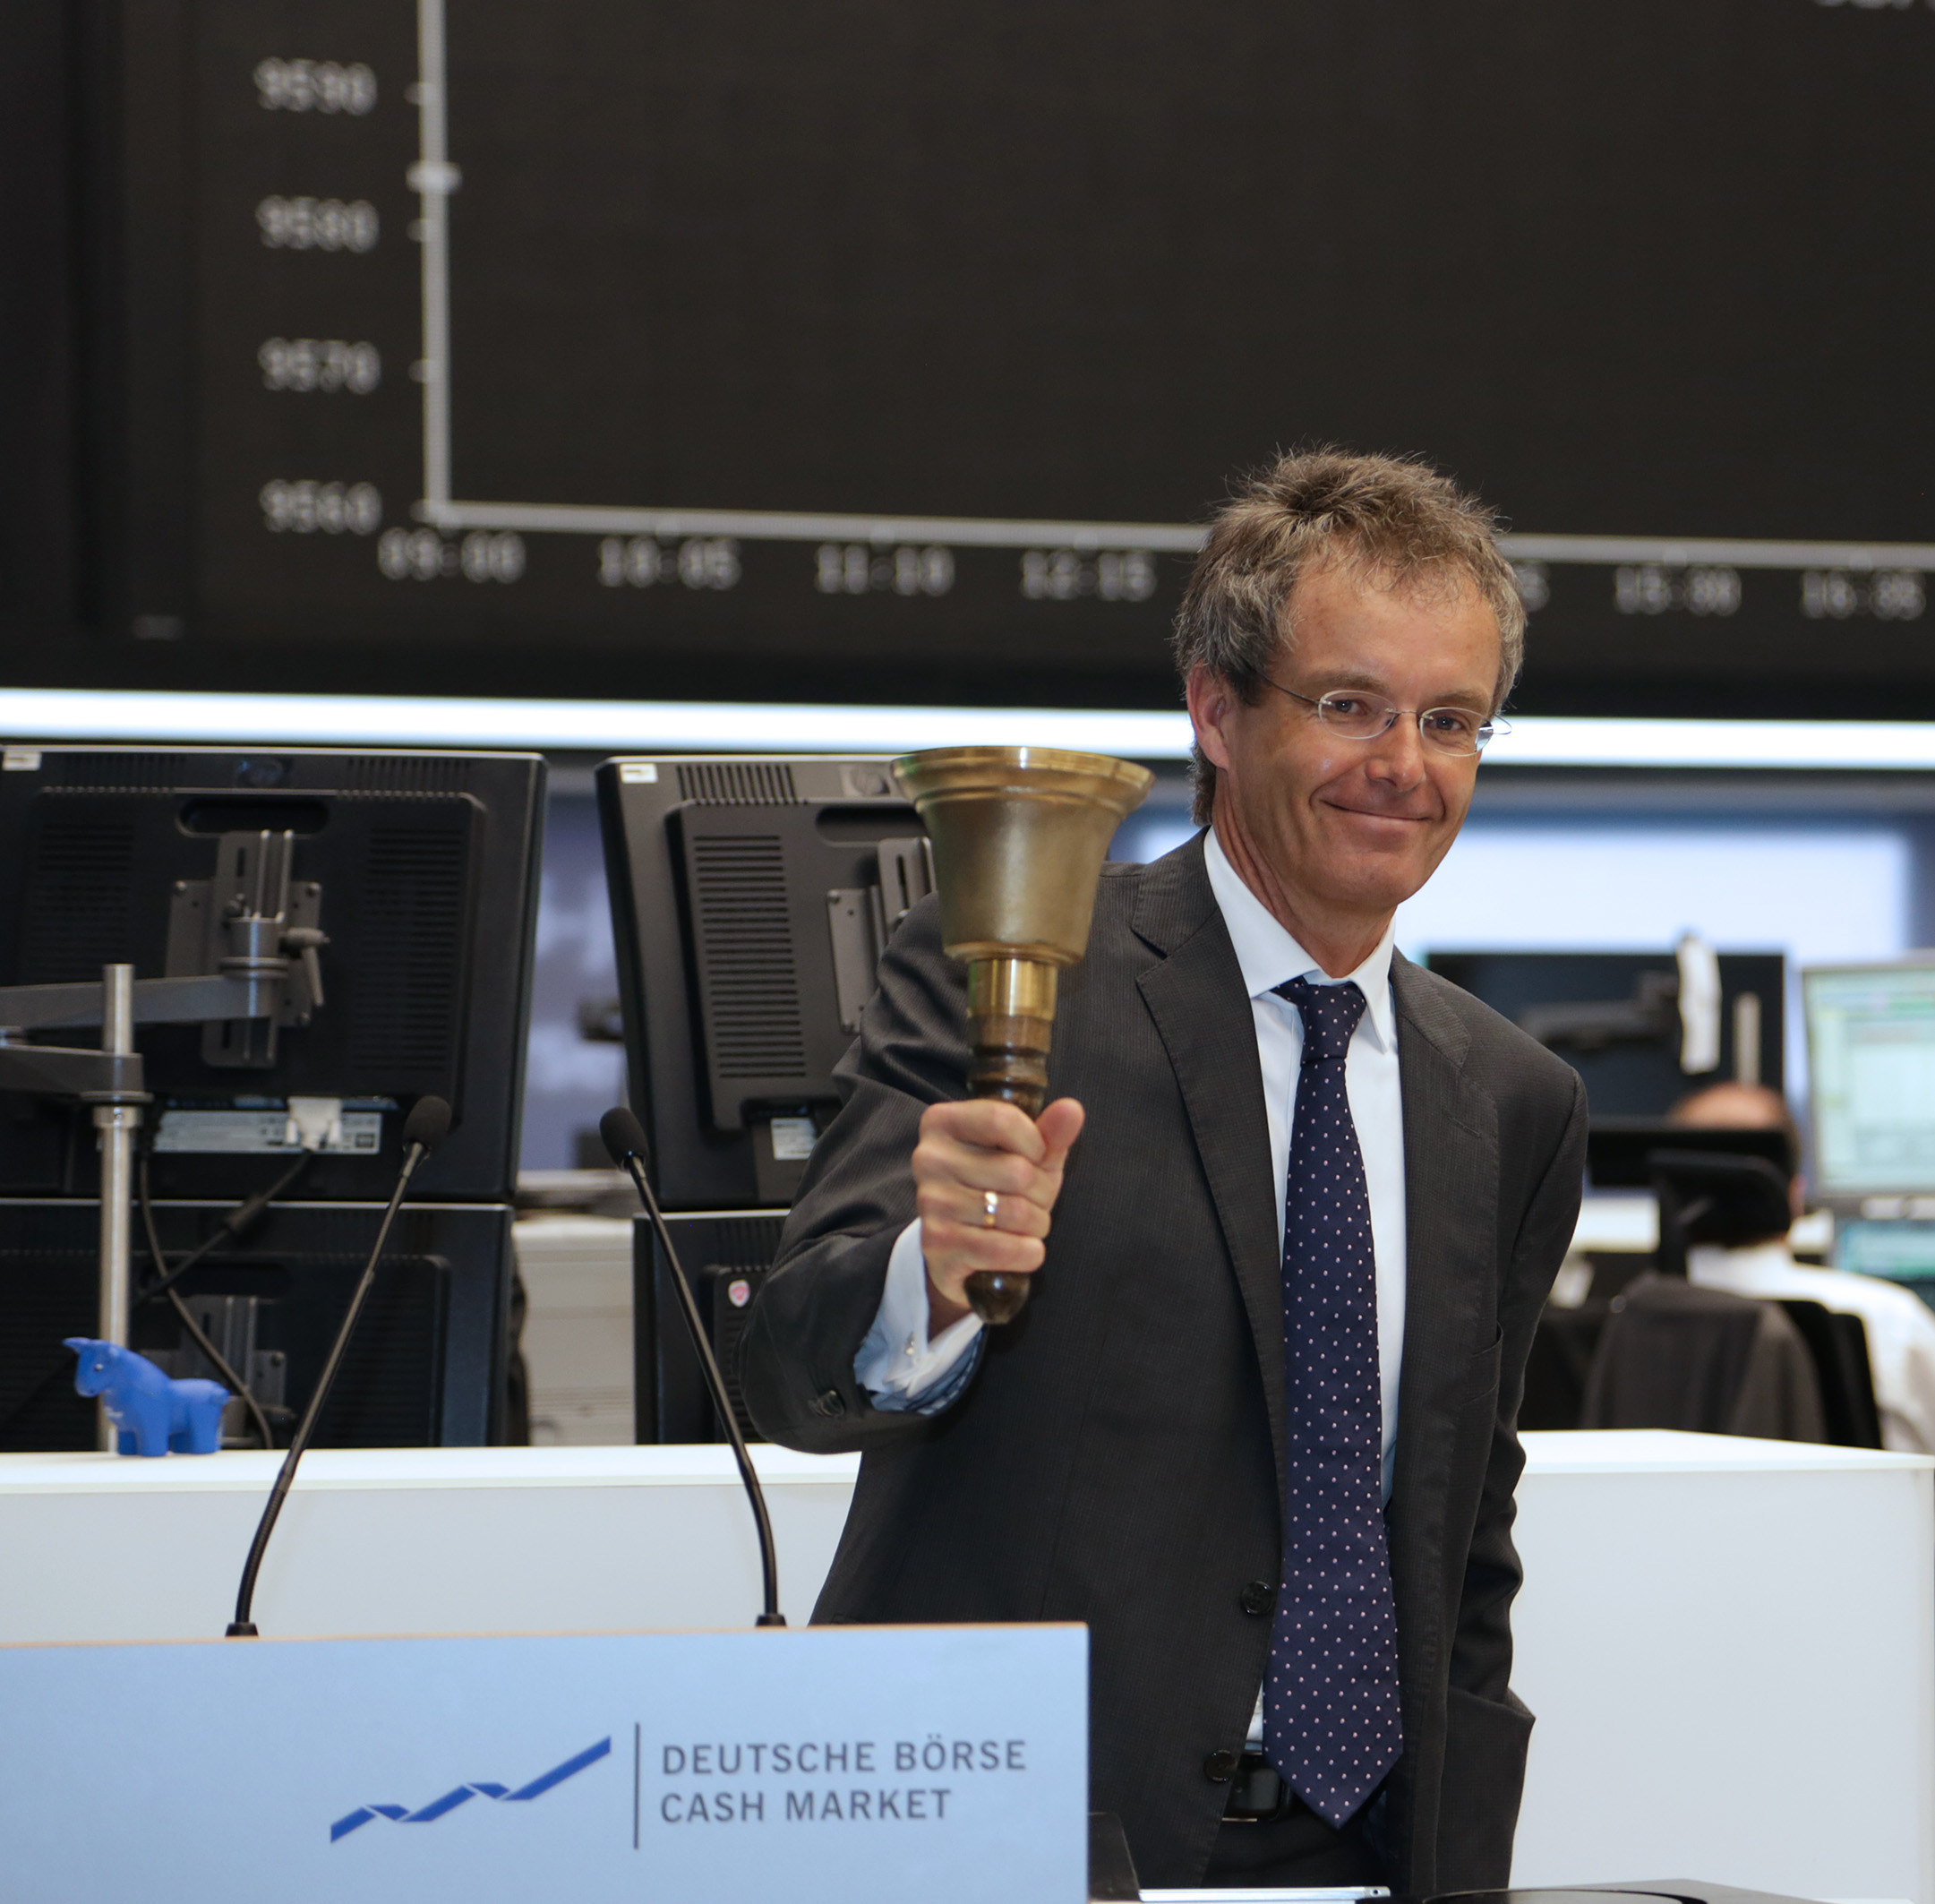 Dr. Bernd Scheifele started the floor trading at the Frankfurt Stock Exchange by ringing the opening bell